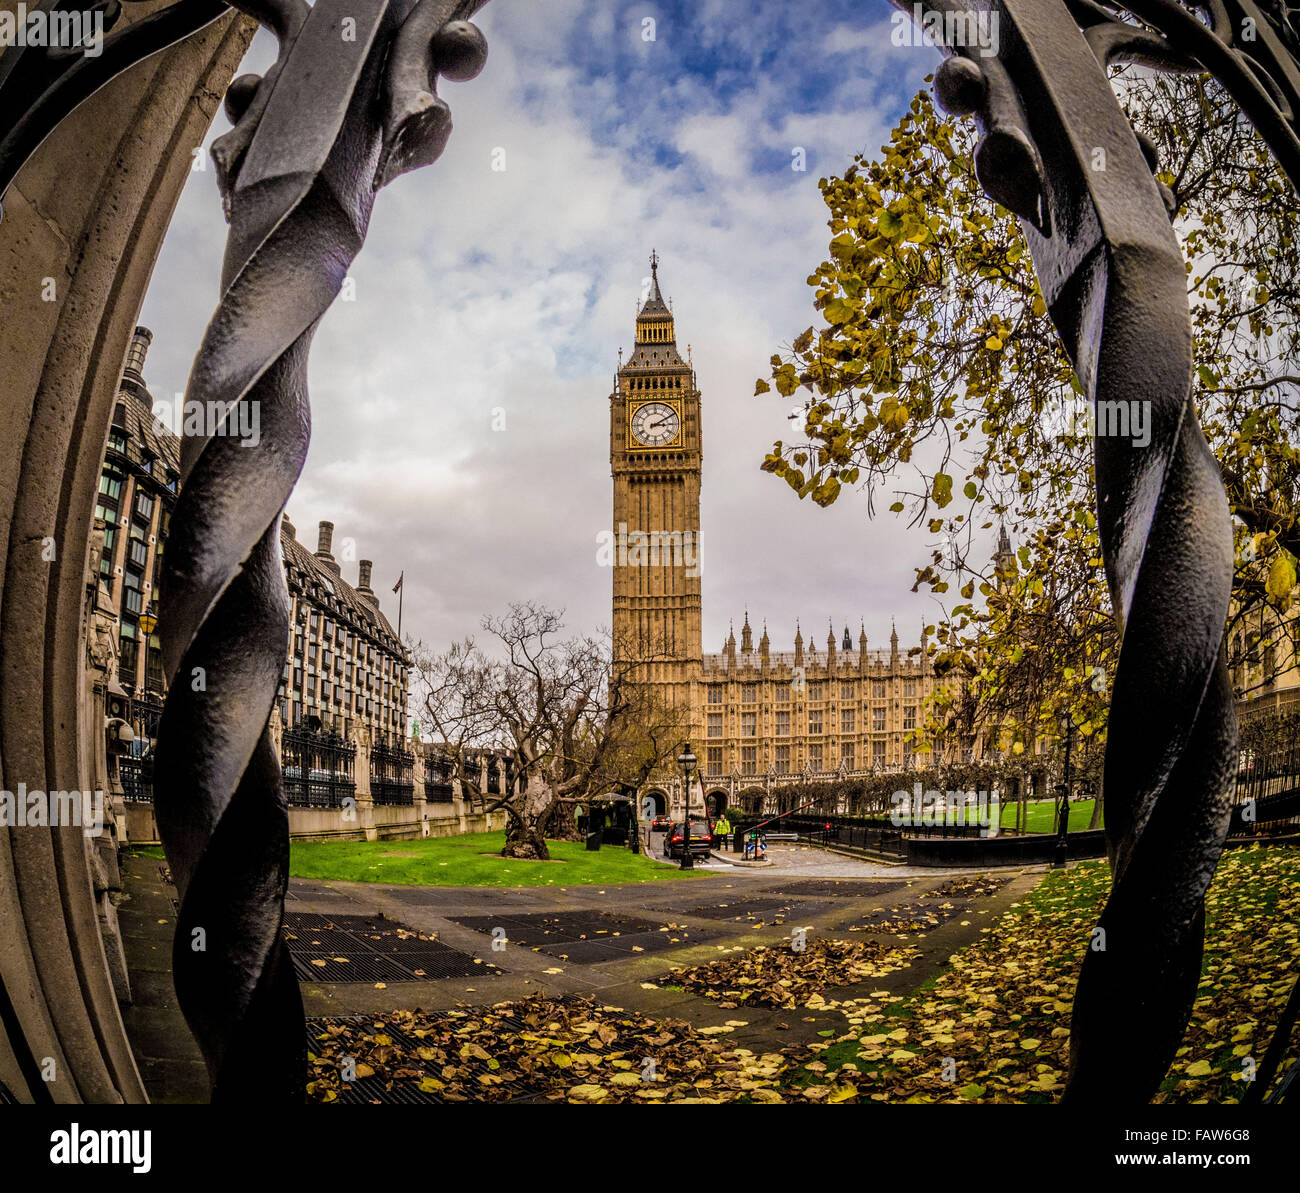 Big Ben and the Houses of Parliament, London, UK. Stock Photo